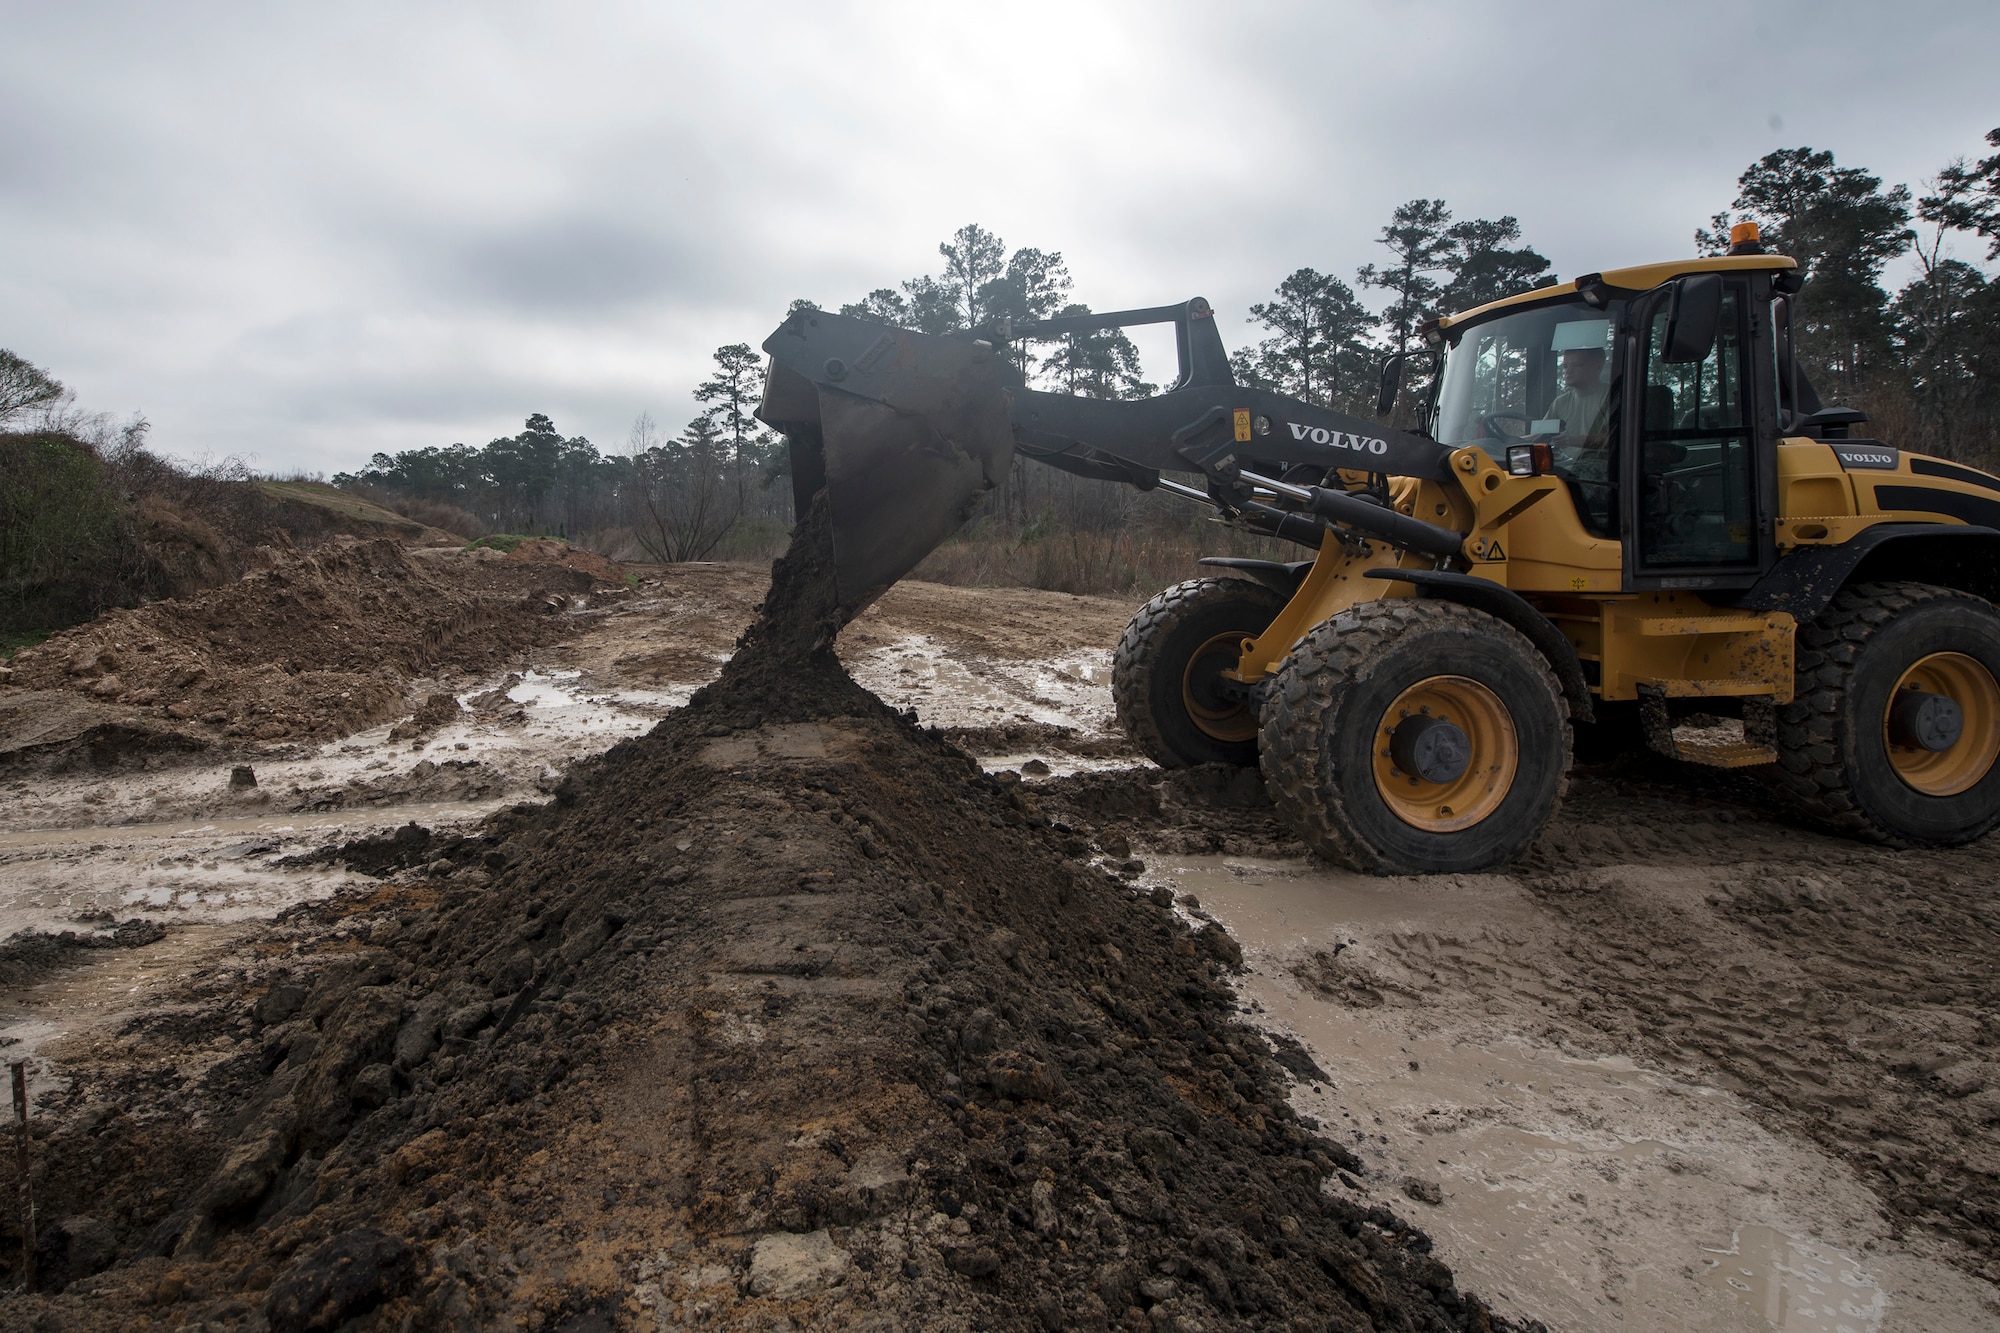 A loader drops dirt on a bern, Feb. 15, 2018, at Moody Air Force Base, Ga. Airmen from the 23d CES participated in a Prime Base Engineer Emergency Force training day to prepare for some of the wartime tasks they could encounter while in a deployed environment. (U.S. Air Force photo by Airman Eugene Oliver)